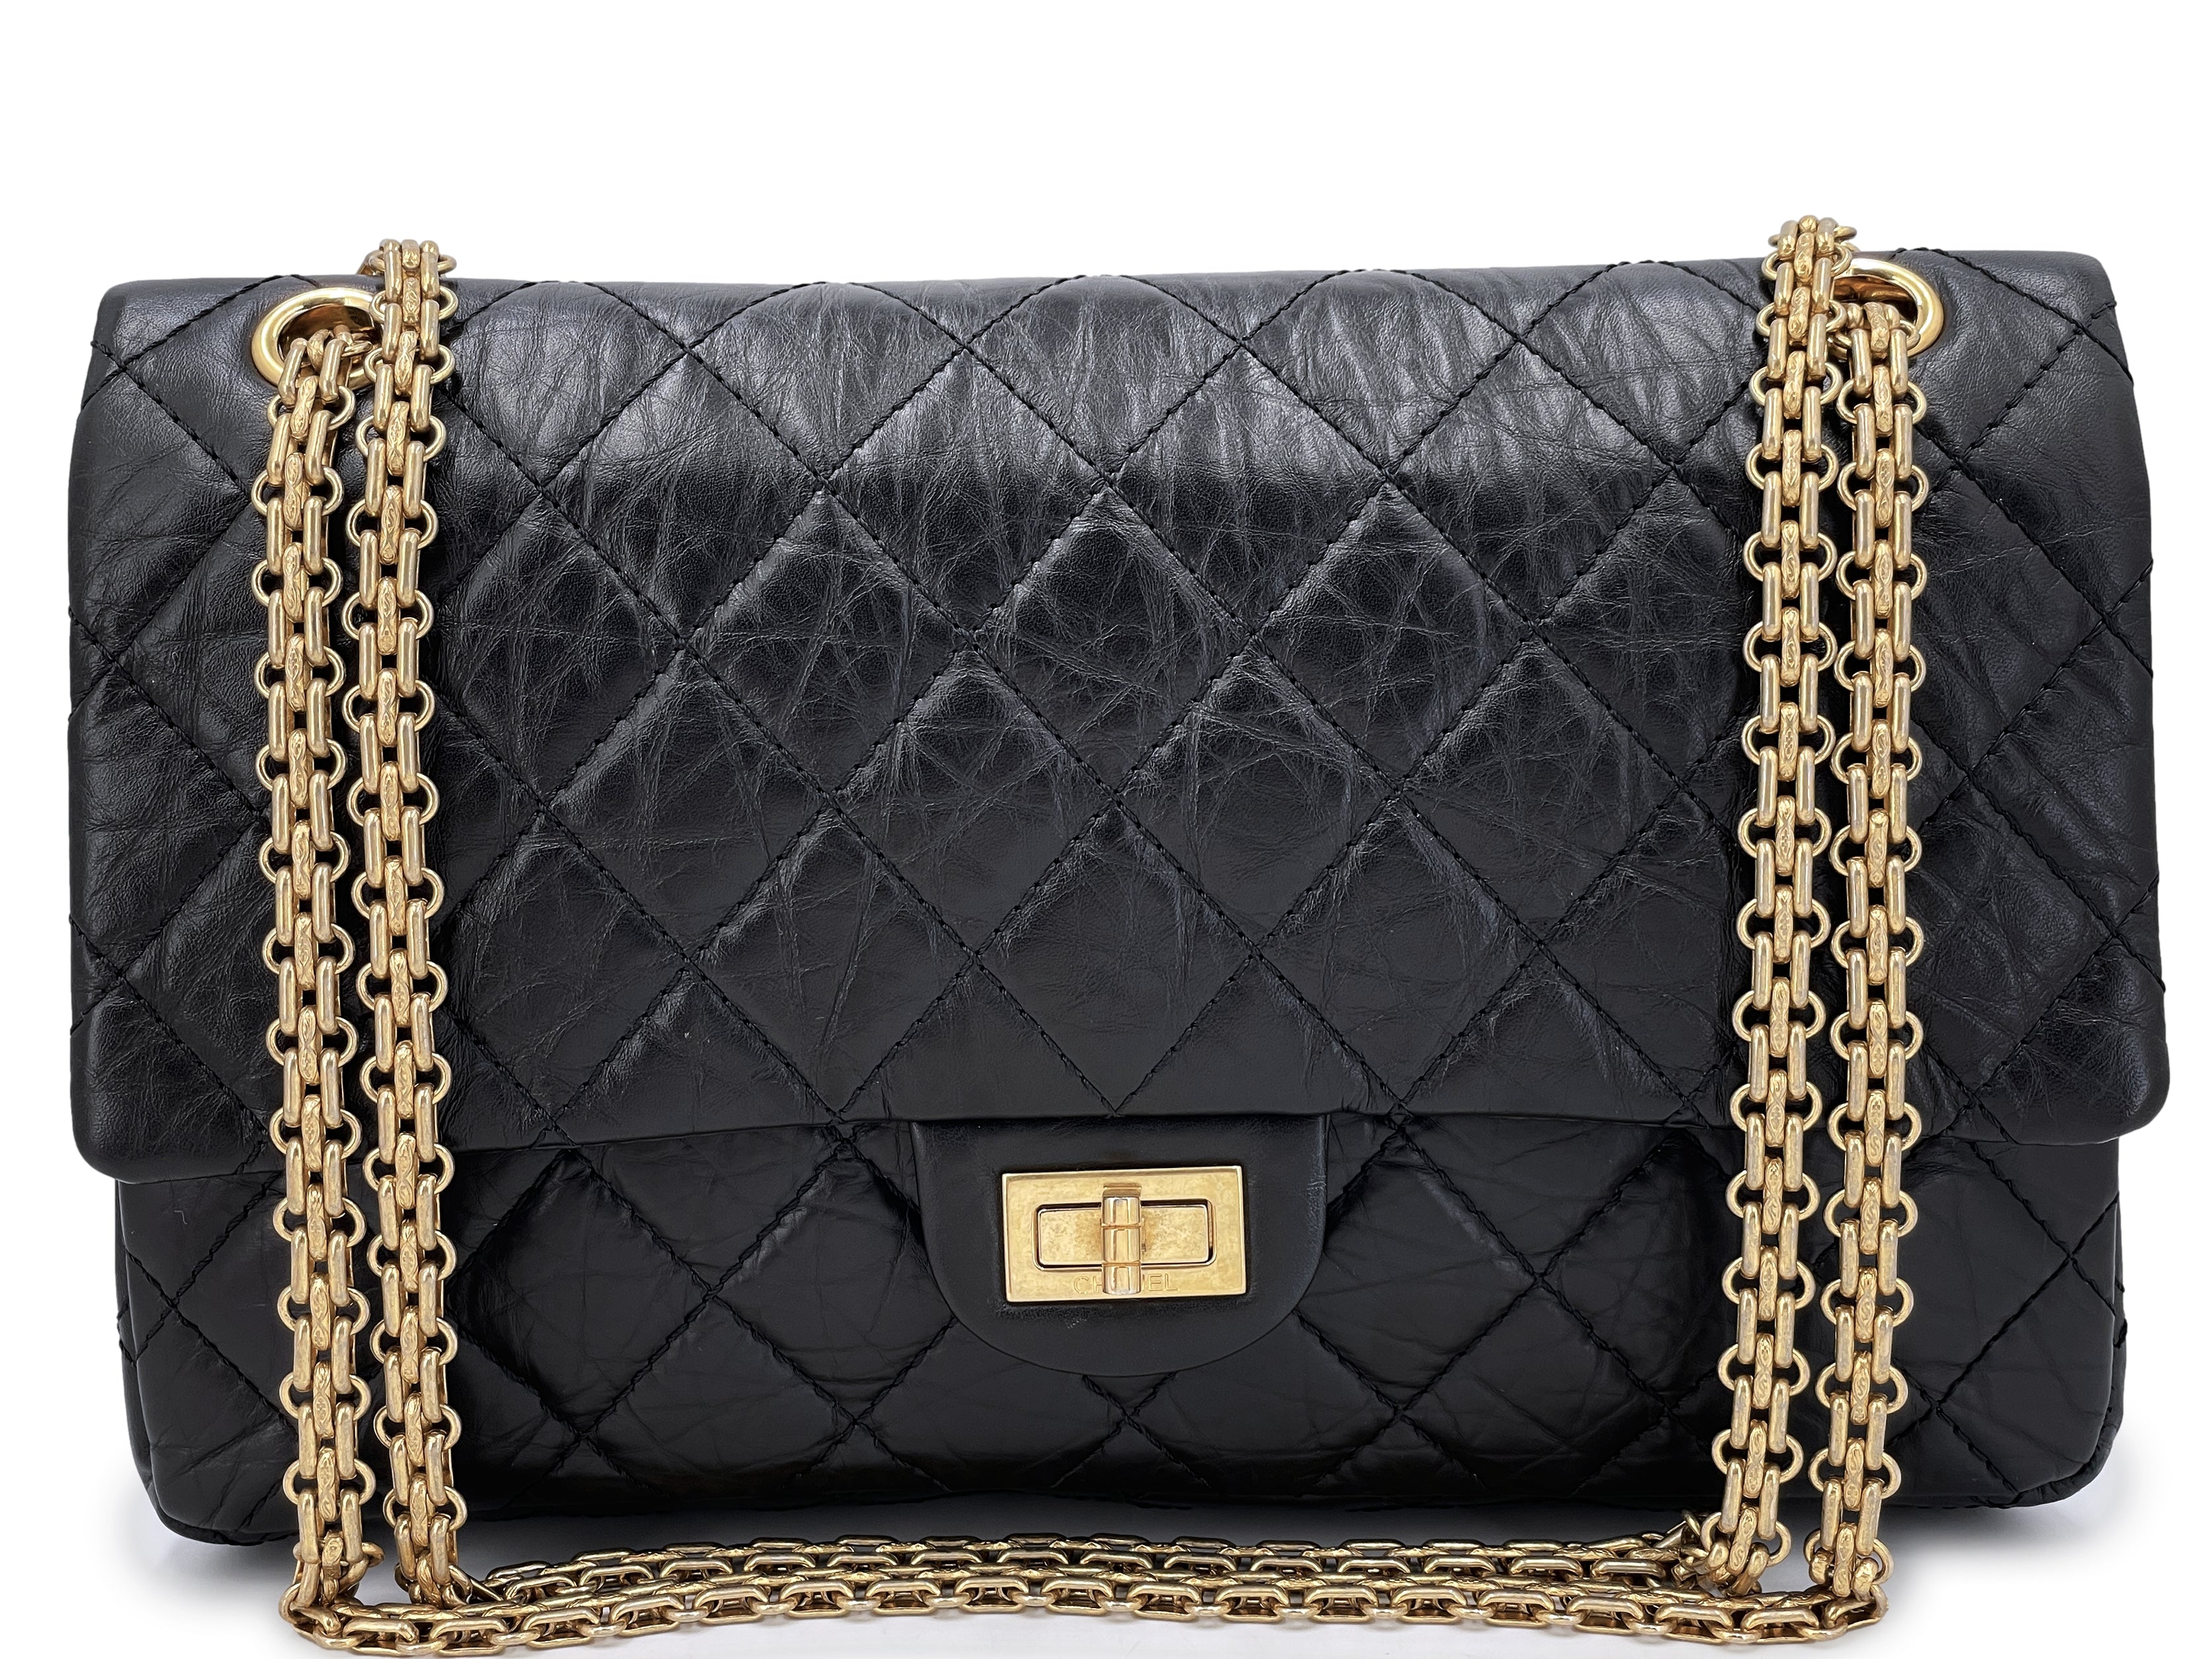 Chanel Reissue 226, Grey Caviar Leather, Ruthenium Hardware, Preowned in  Black Dustbag